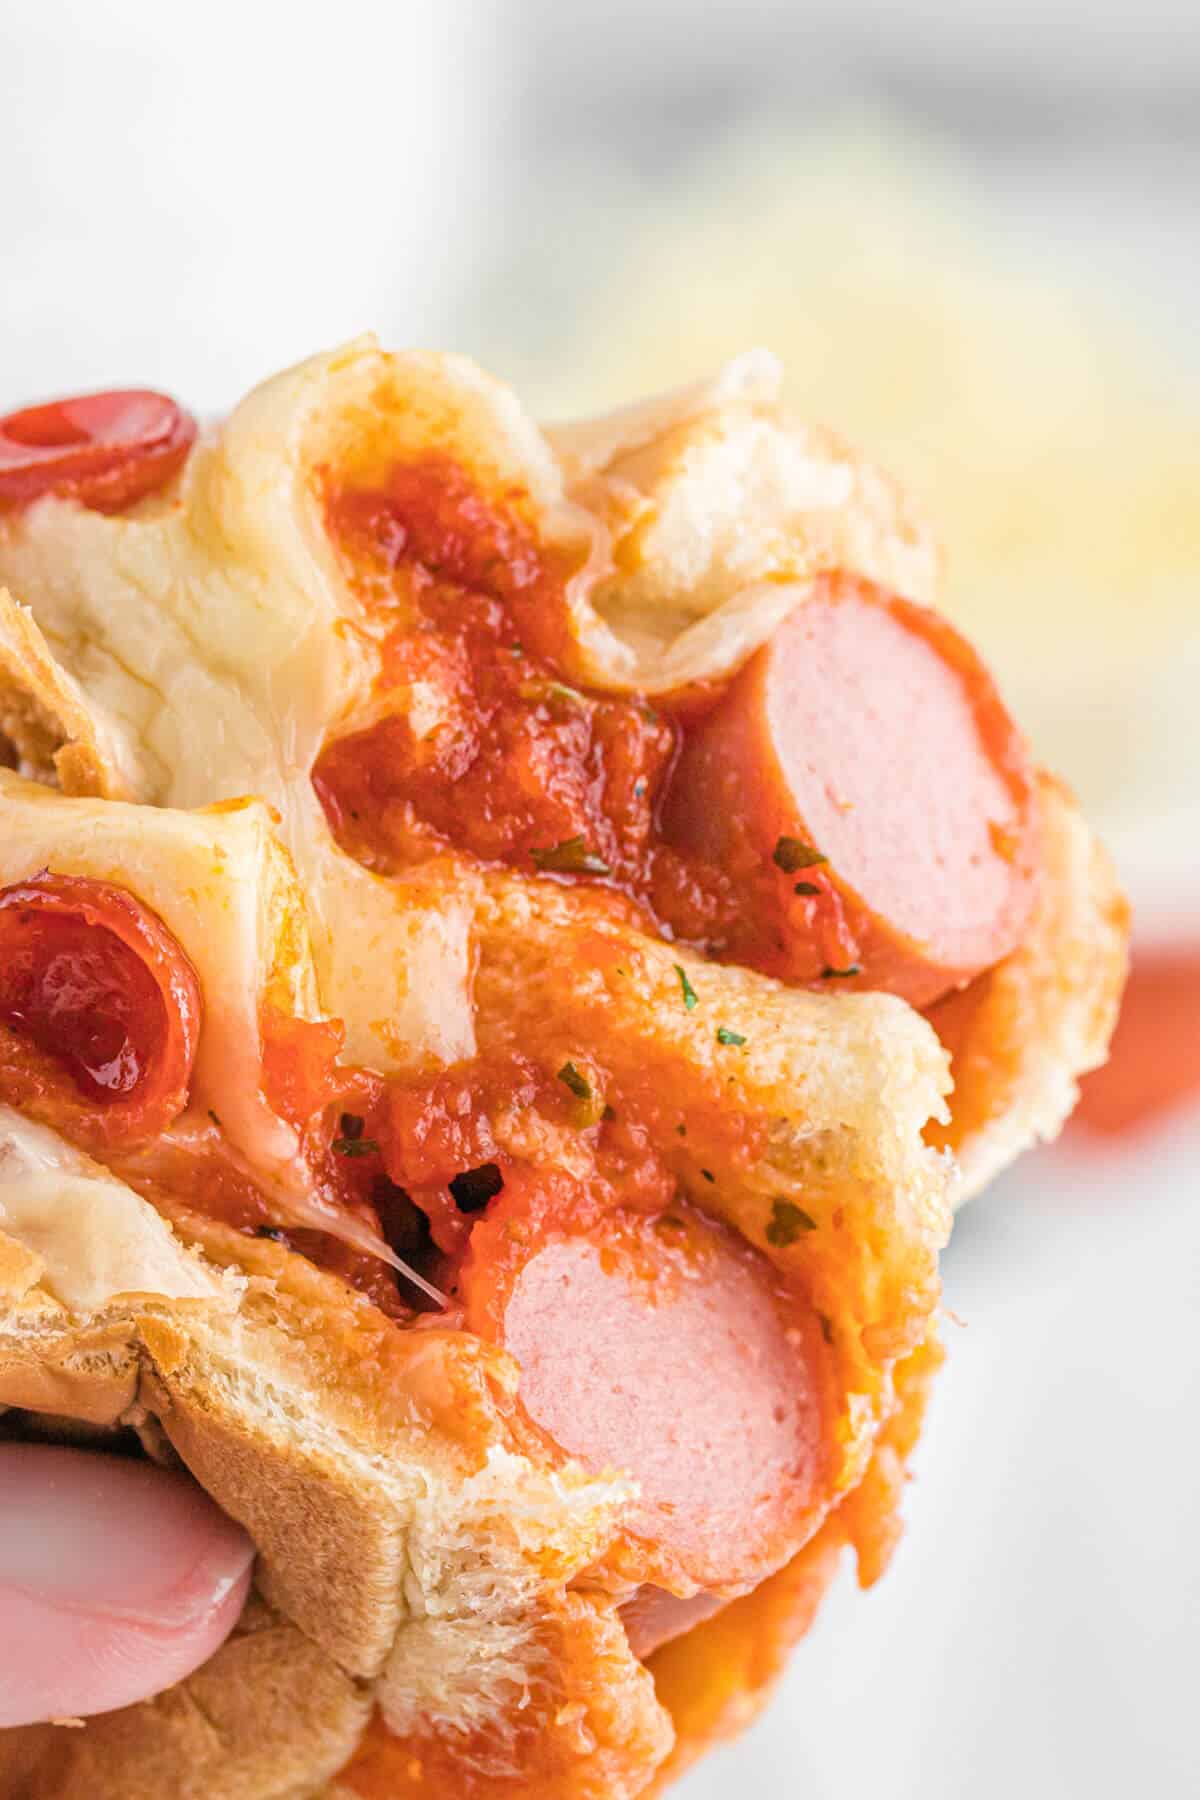 A pizza hot dog cut in half being held by a hand.